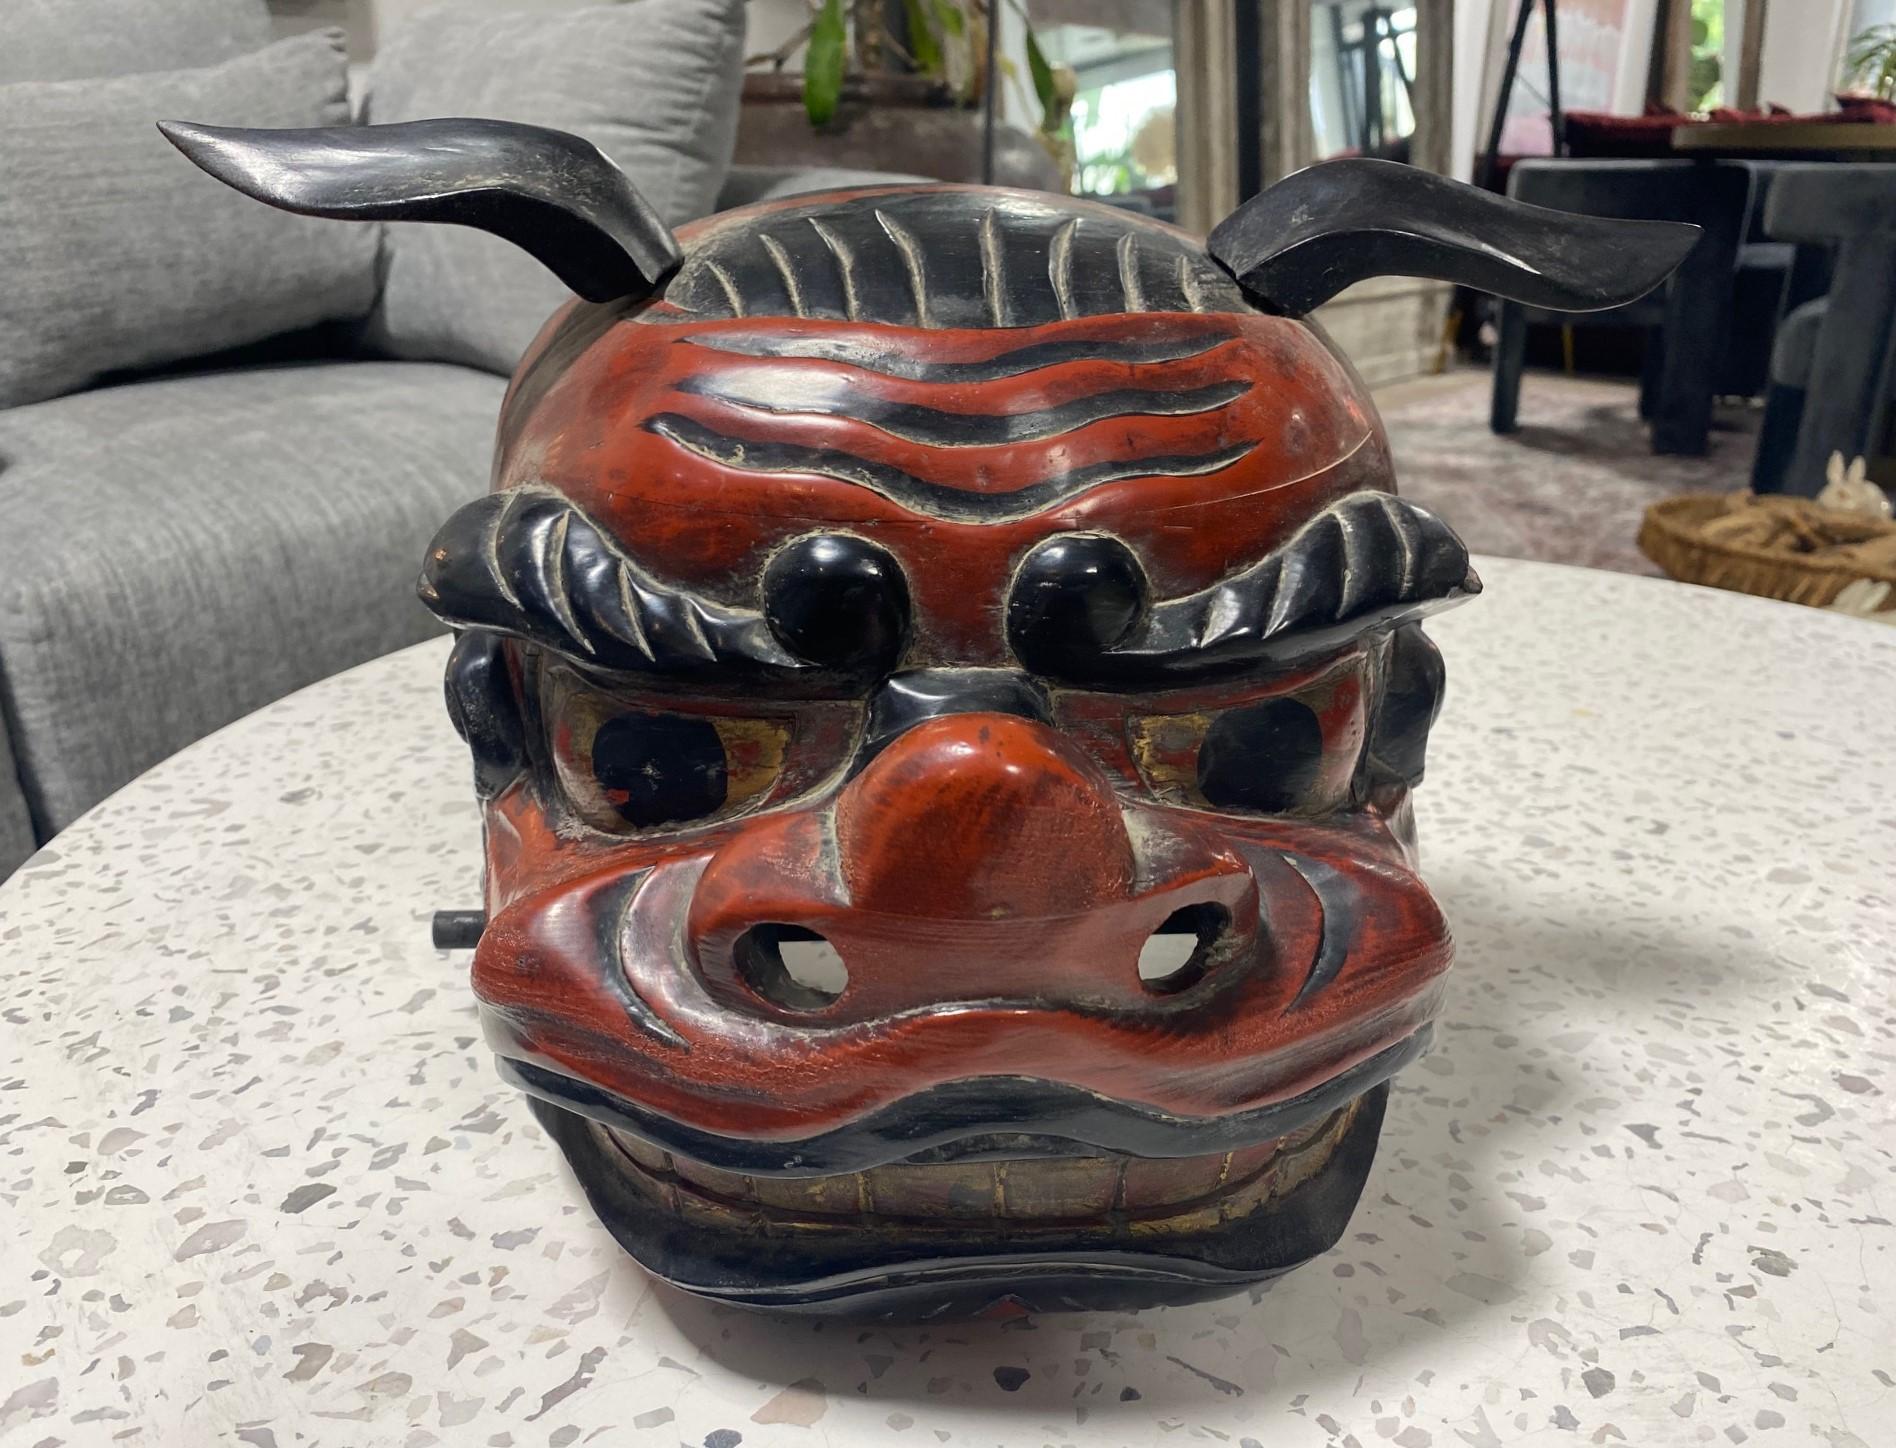 A wonderful, beautifully crafted Japanese festival Shishi Lion Dance (Shishi Mai) mask (Gashira). 

The shishi mask represents a mythical lion that protects and purifies the region in which it dances, driving away evil spirits, famine, and